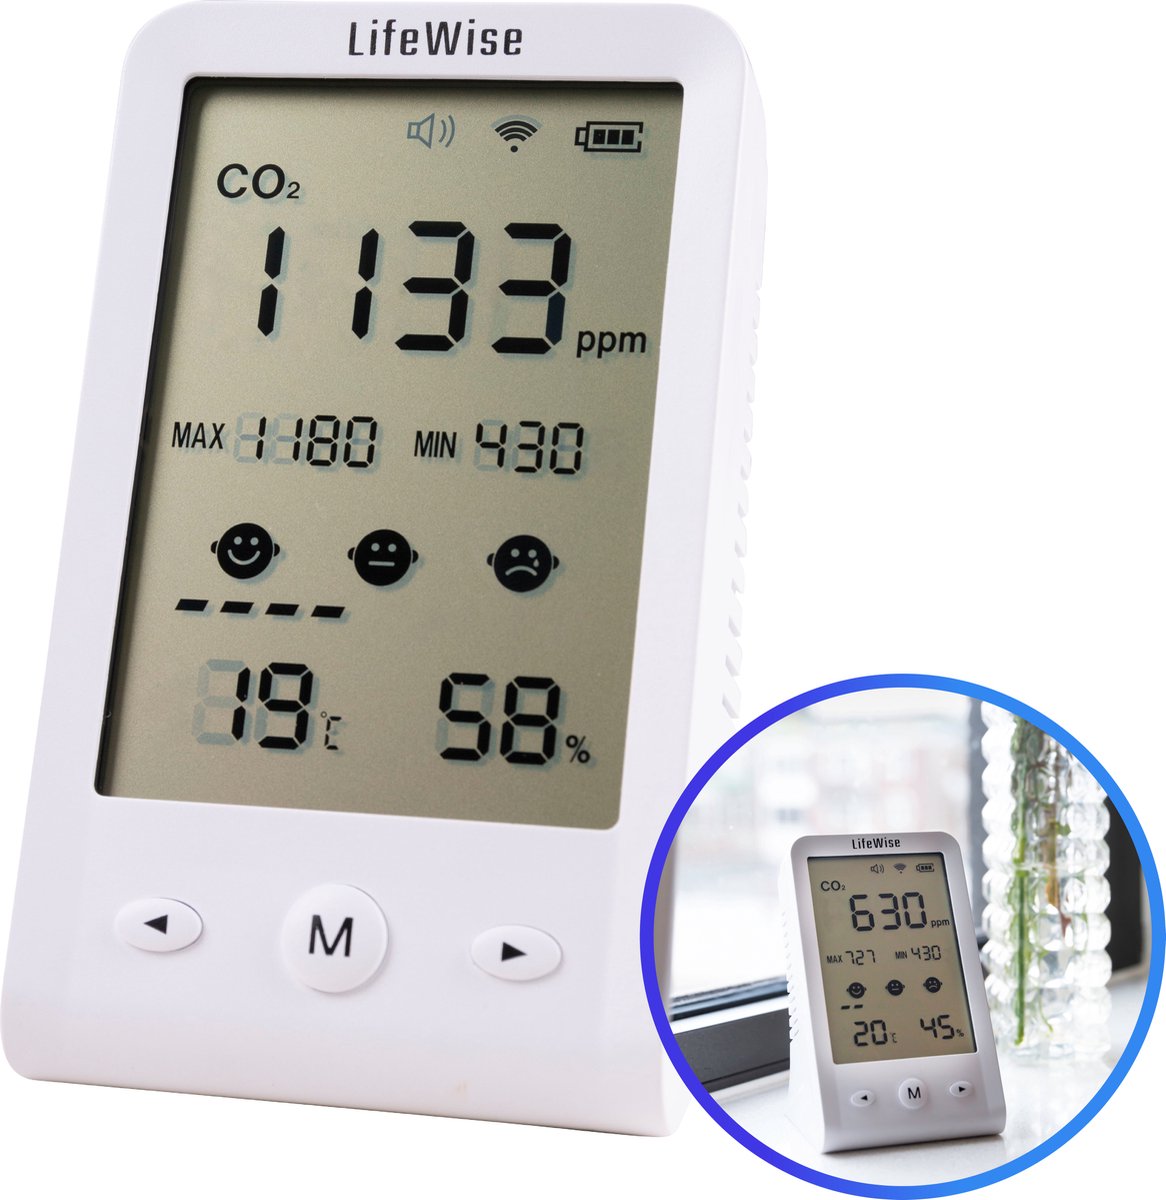 LifeWise CO2 Meter review